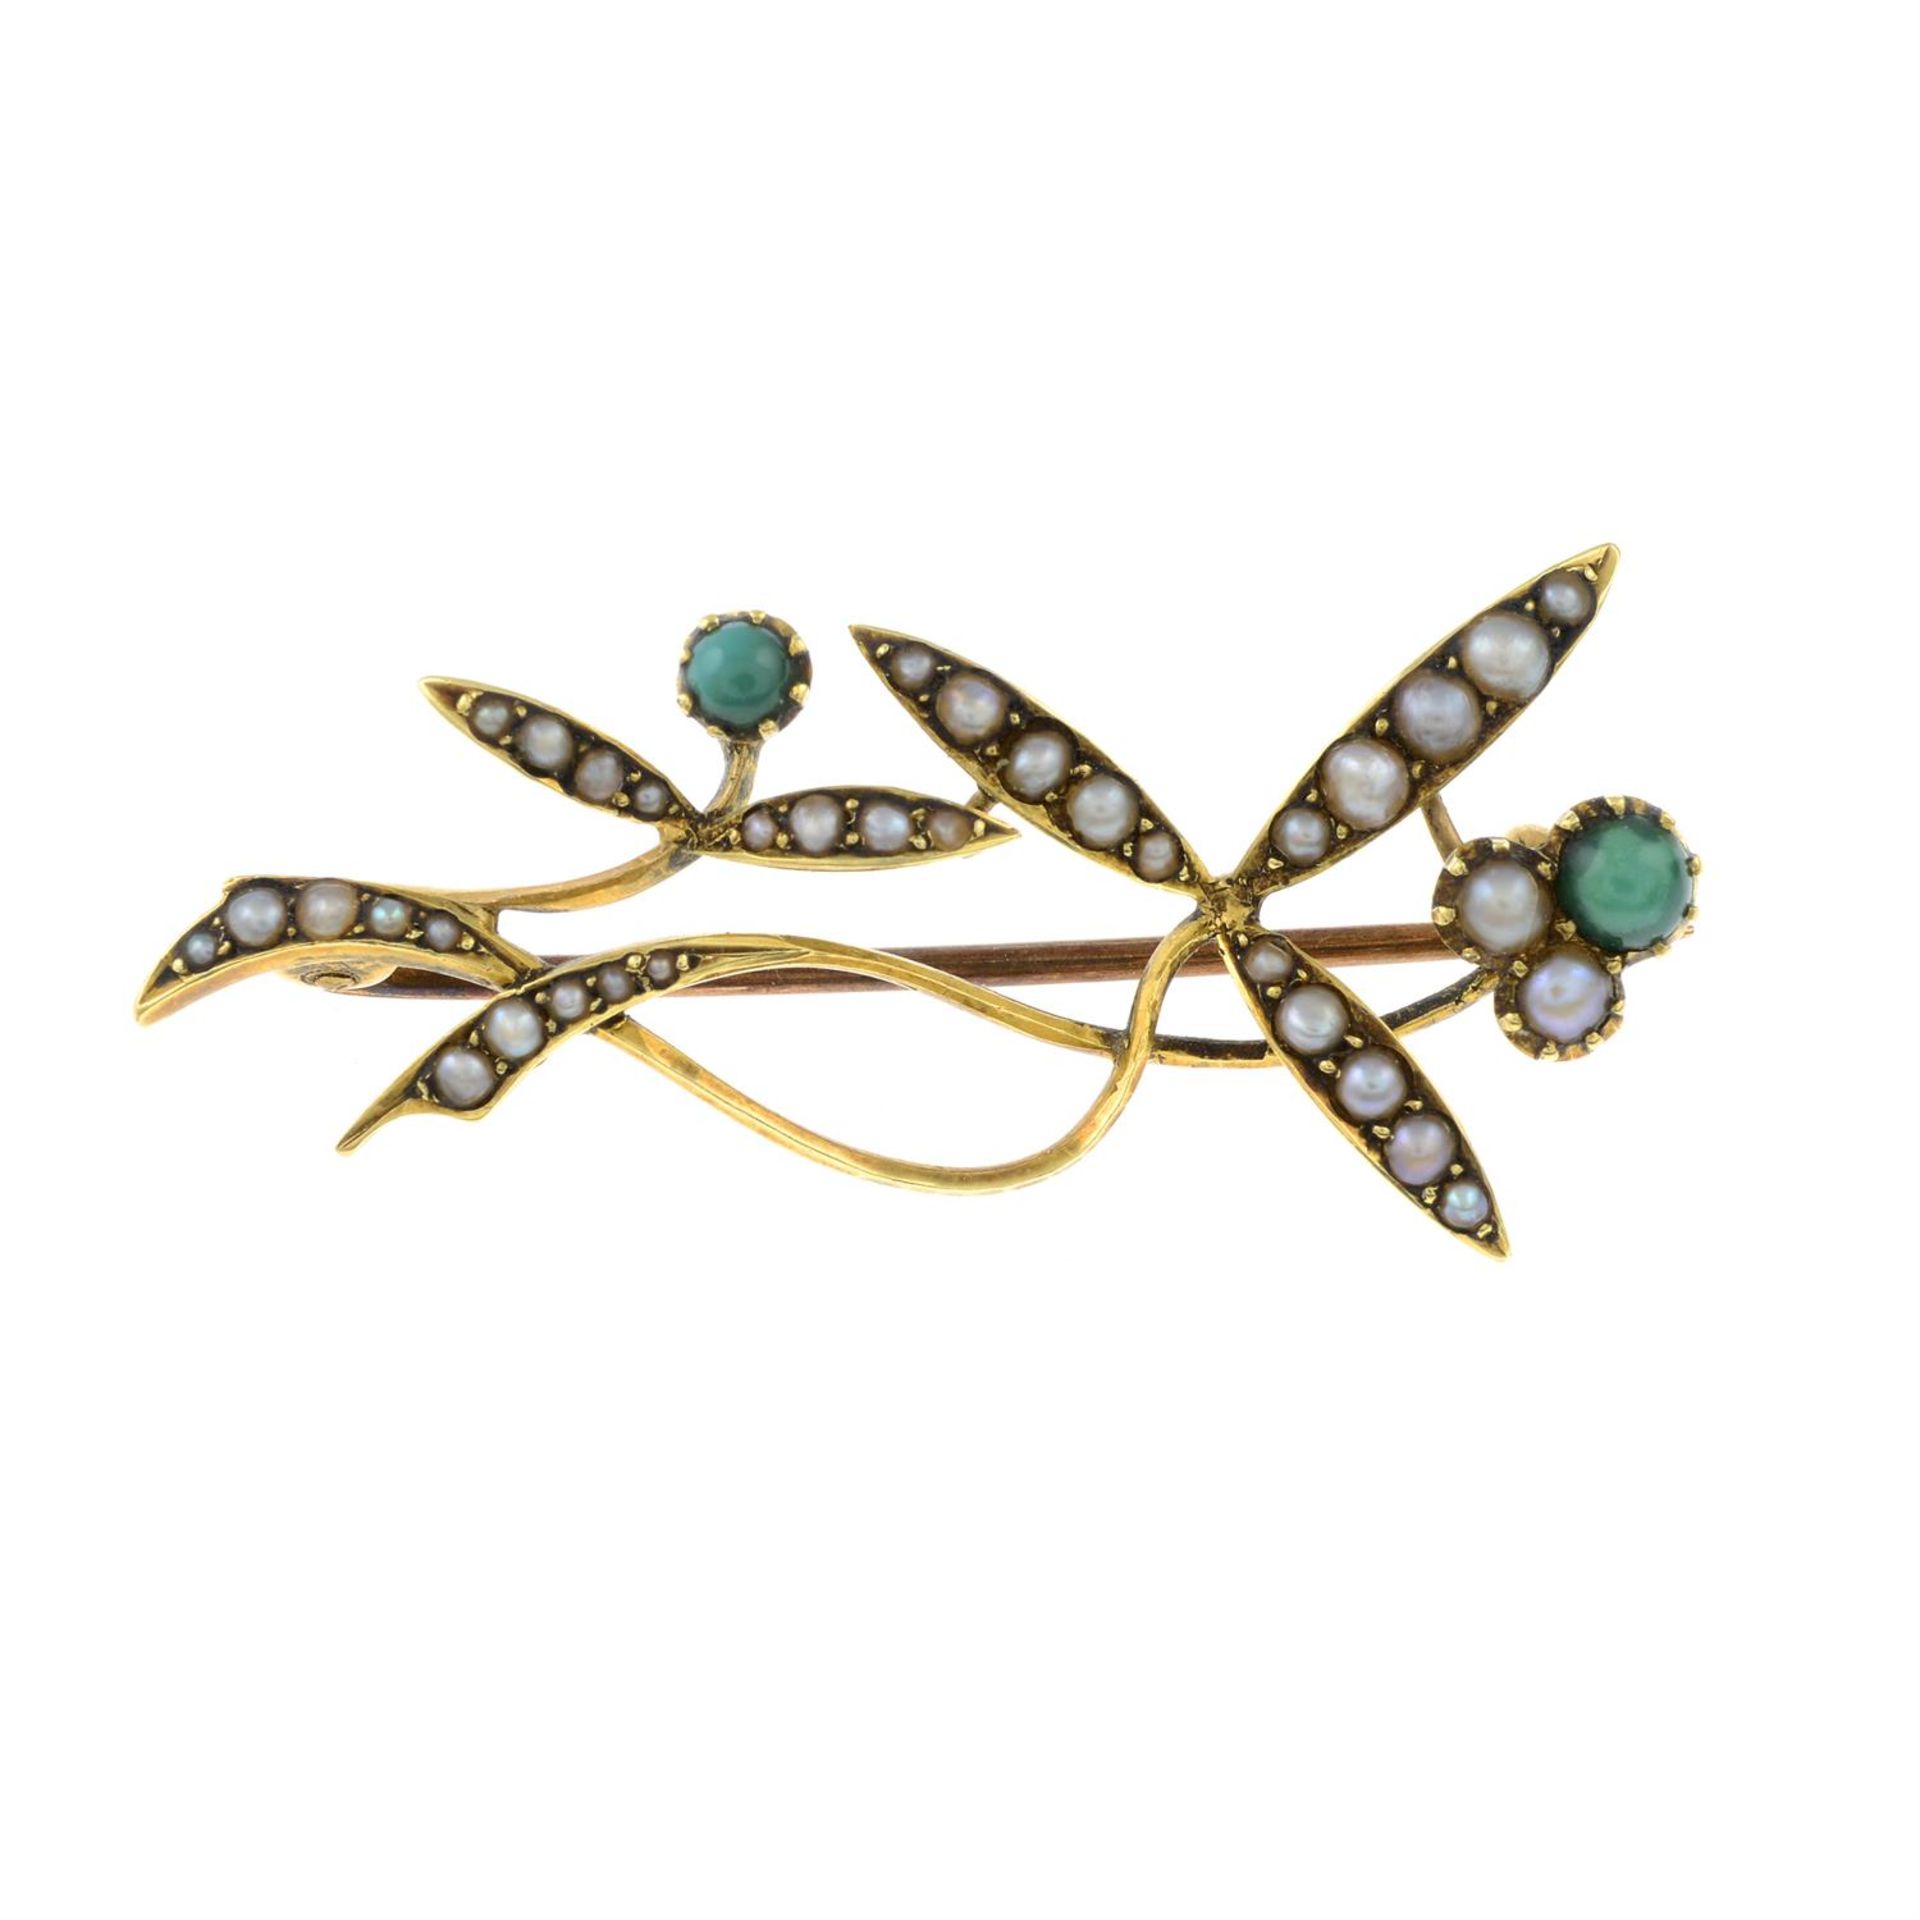 A 19th century, 15ct gold, turquoise and seed pearl floral spray brooch.